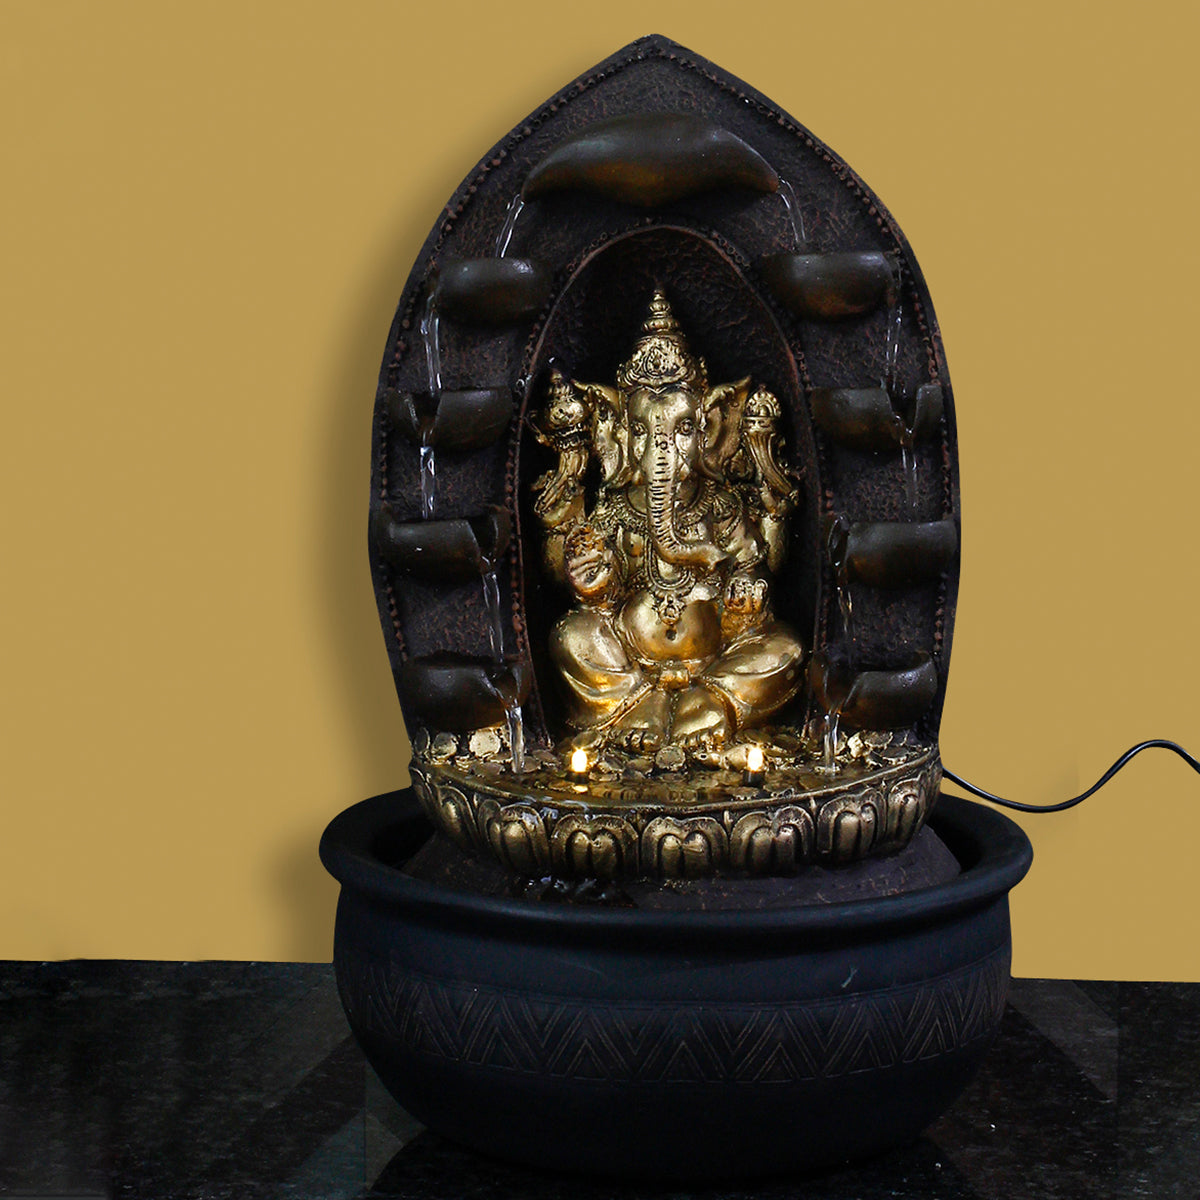 Polystone Black and Golden Decorative Lord Ganesha Statue Water Fountain With Light For Home/Office Décor